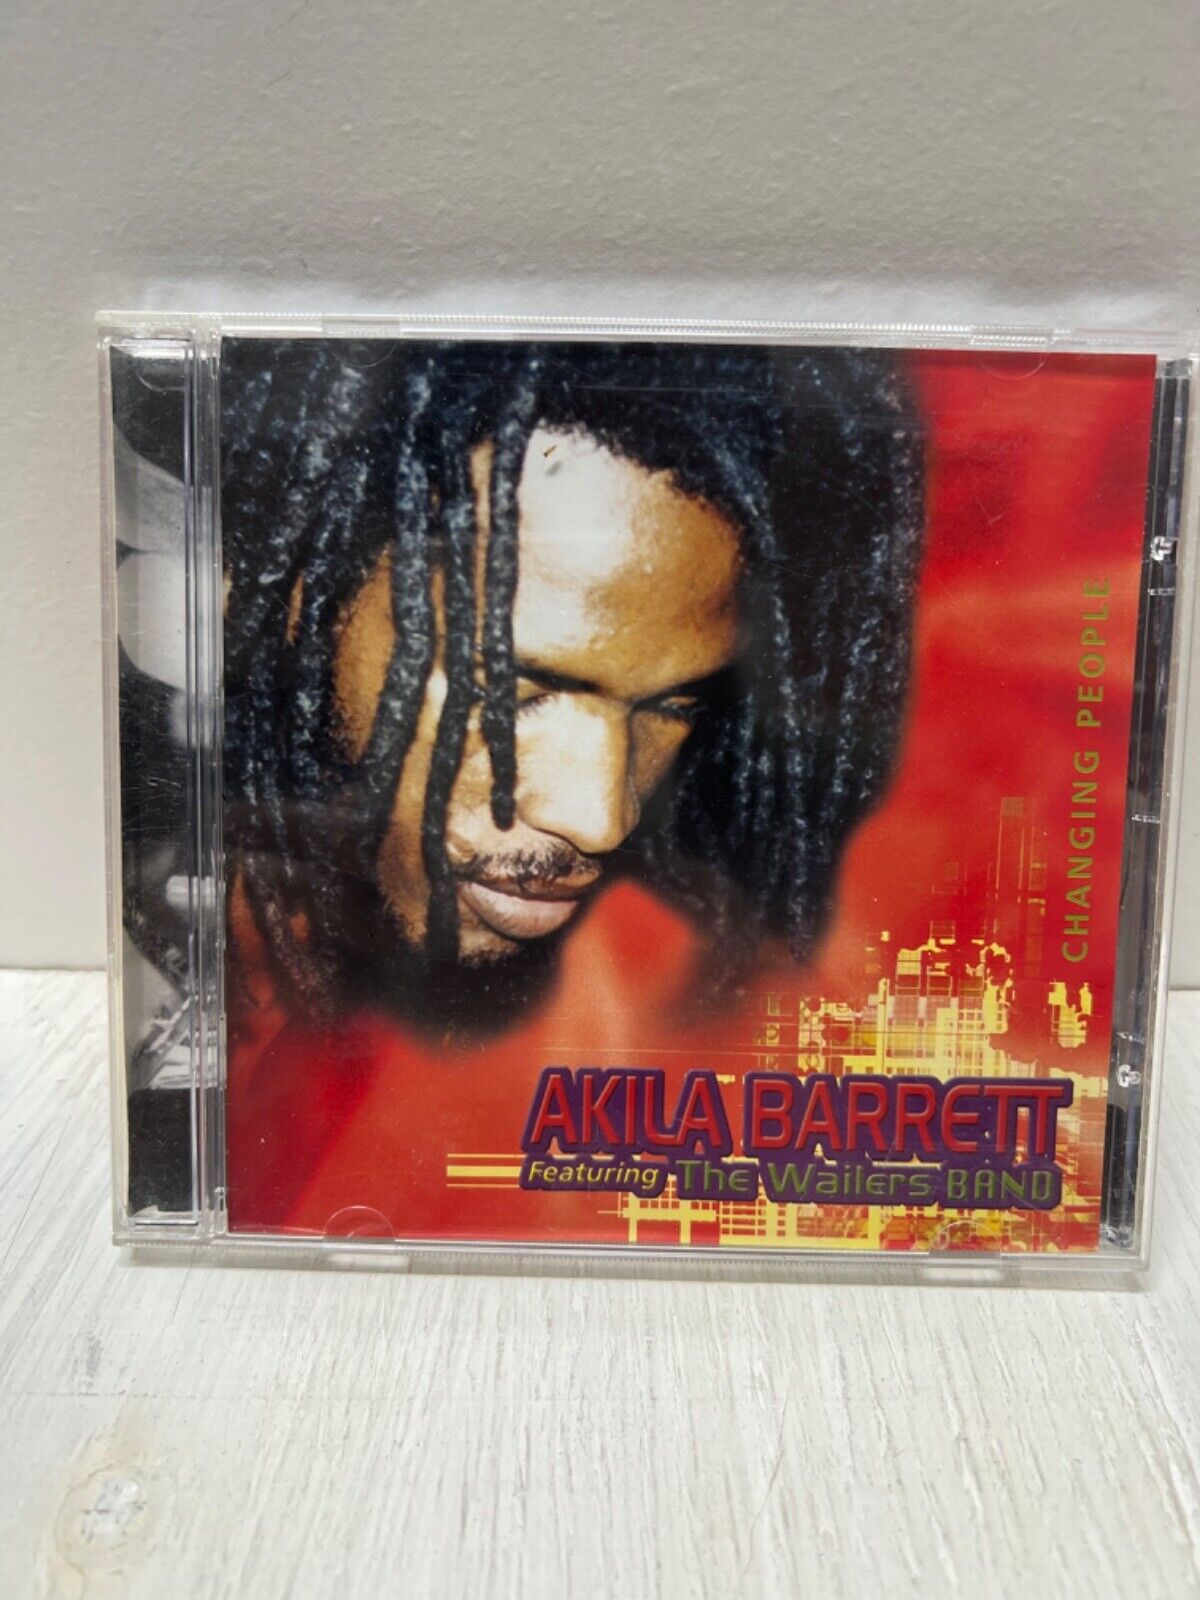 Rare Collectible Vintage Hard to Find Reggae CDs, VOLUME DISCOUNT available